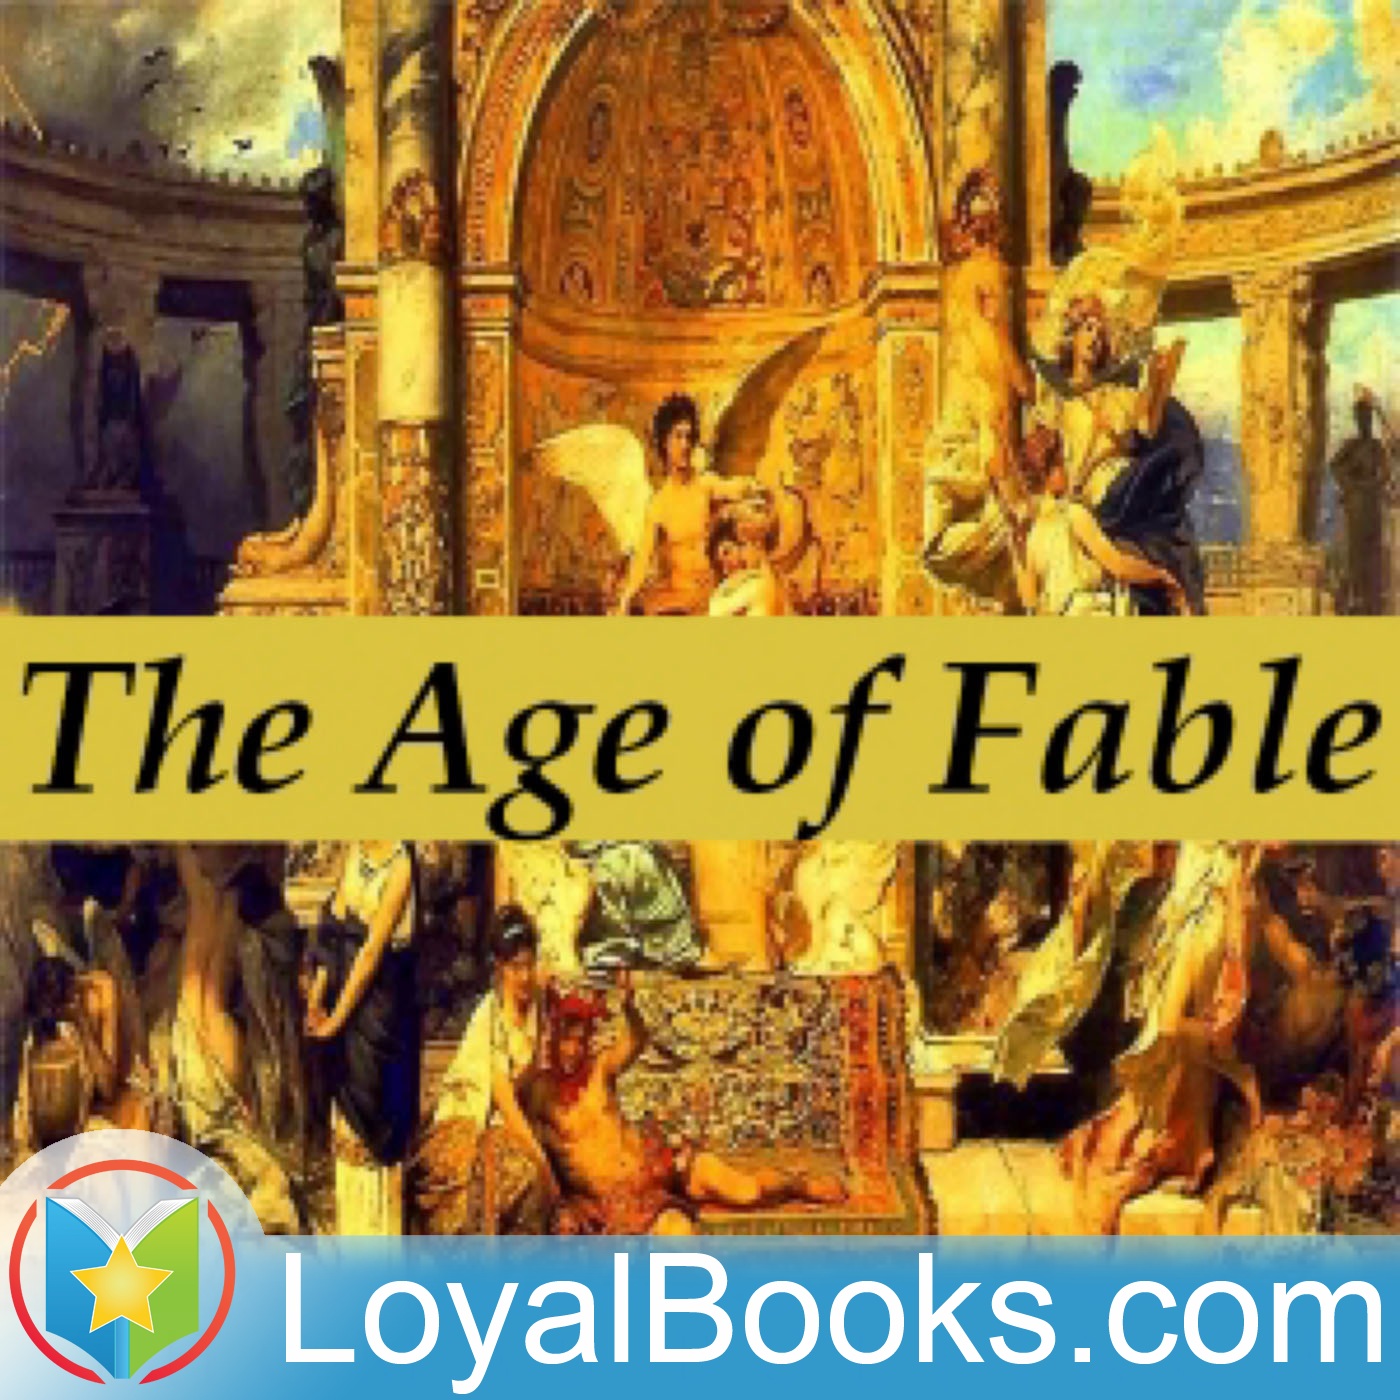 The Age of Fable: Publisher’s and Author’s Prefaces